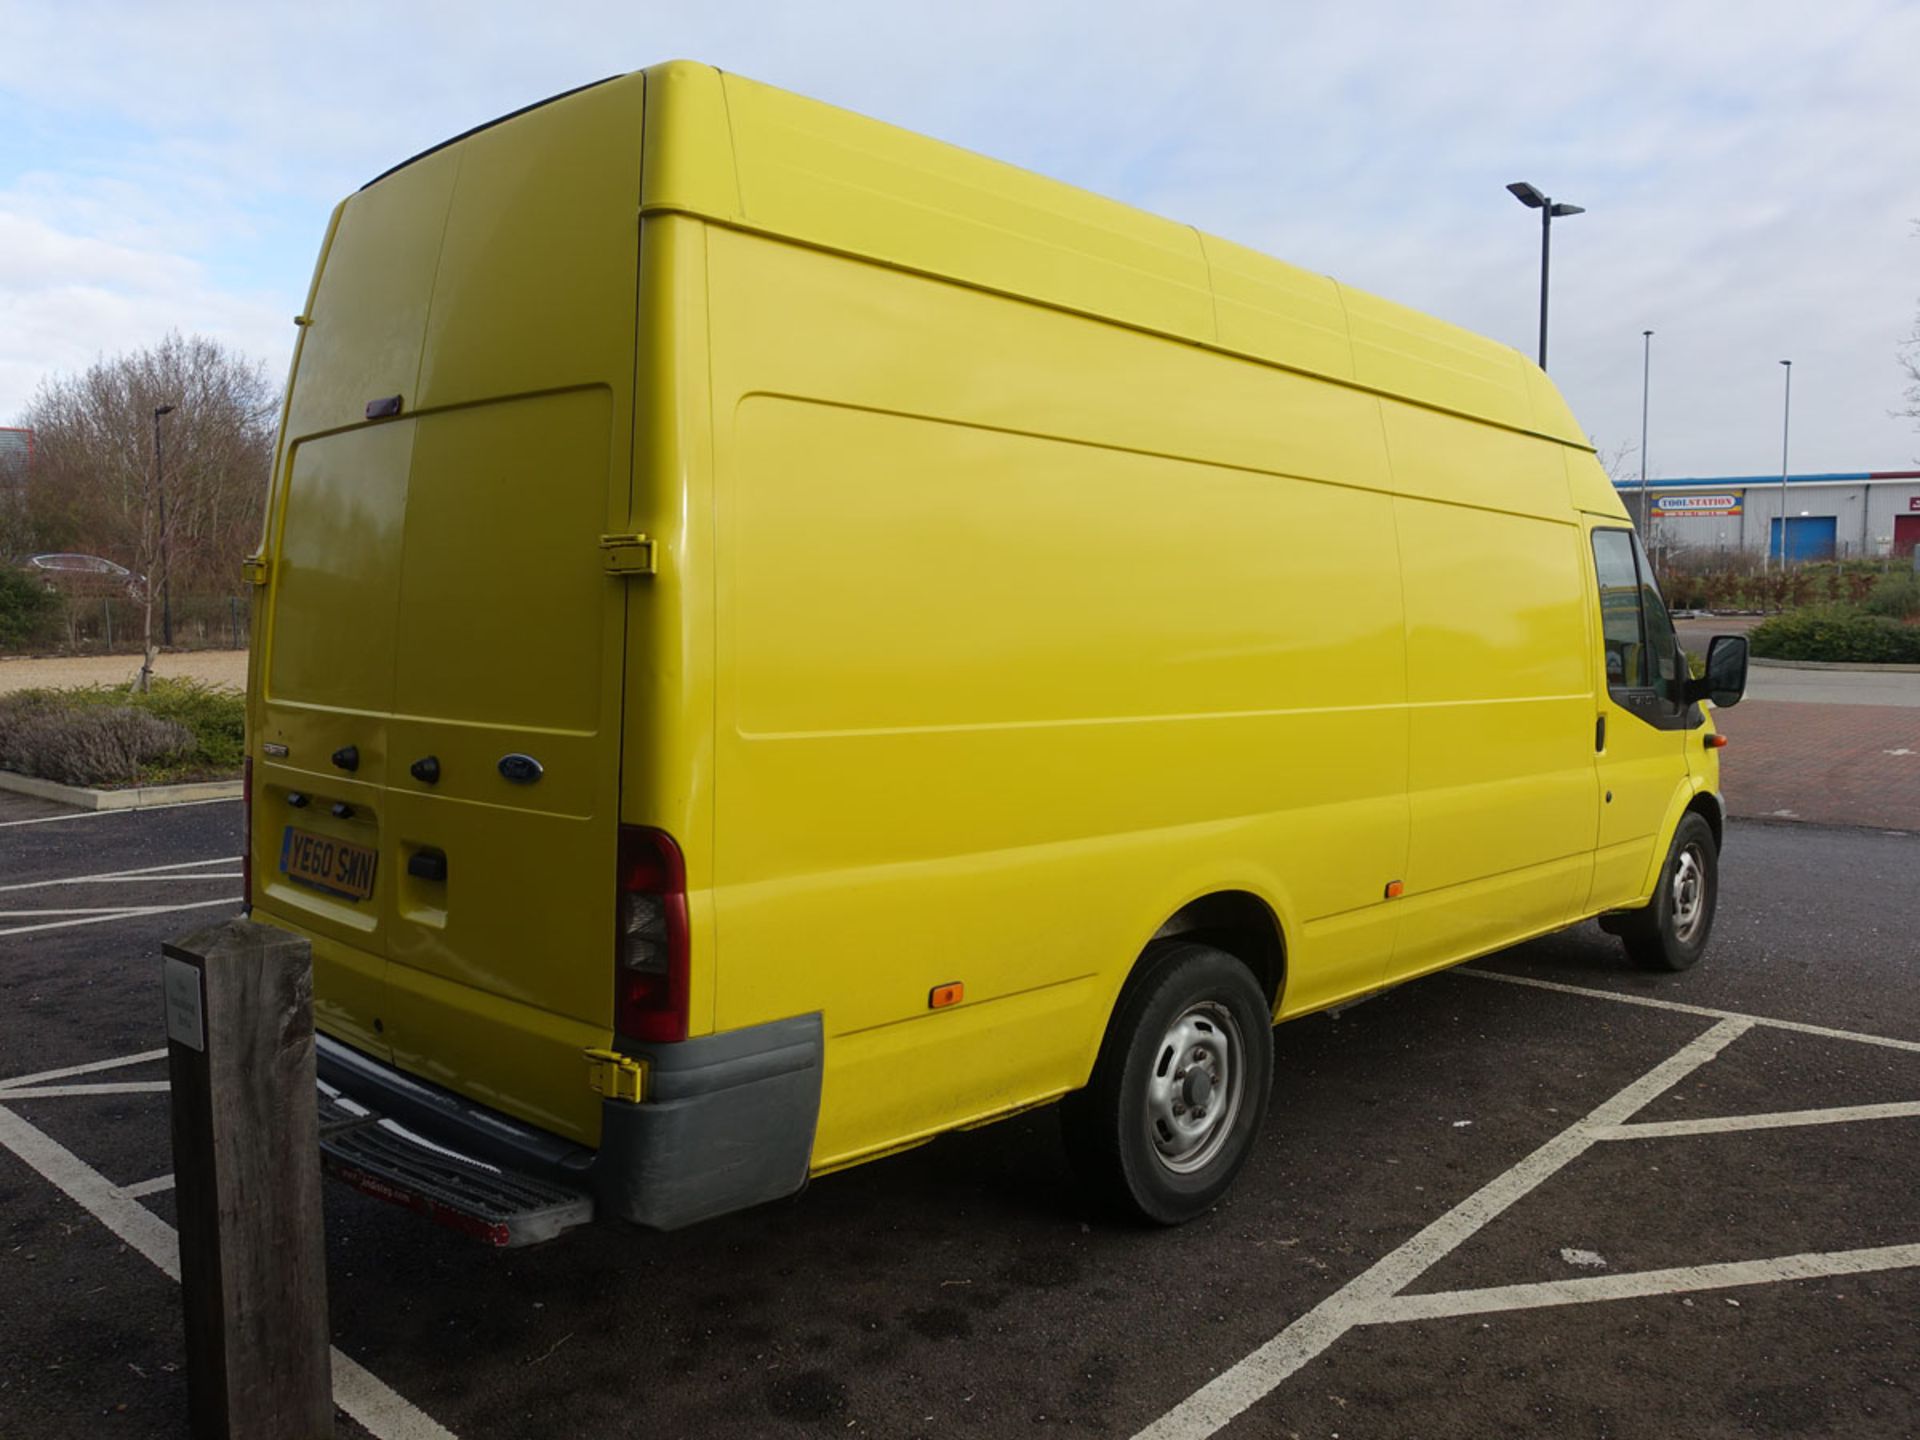 2010 Ford Transit Panel Van in yellow, 2402cc, key and V5 present, first registered 26,11,2010, 3 - Image 3 of 7